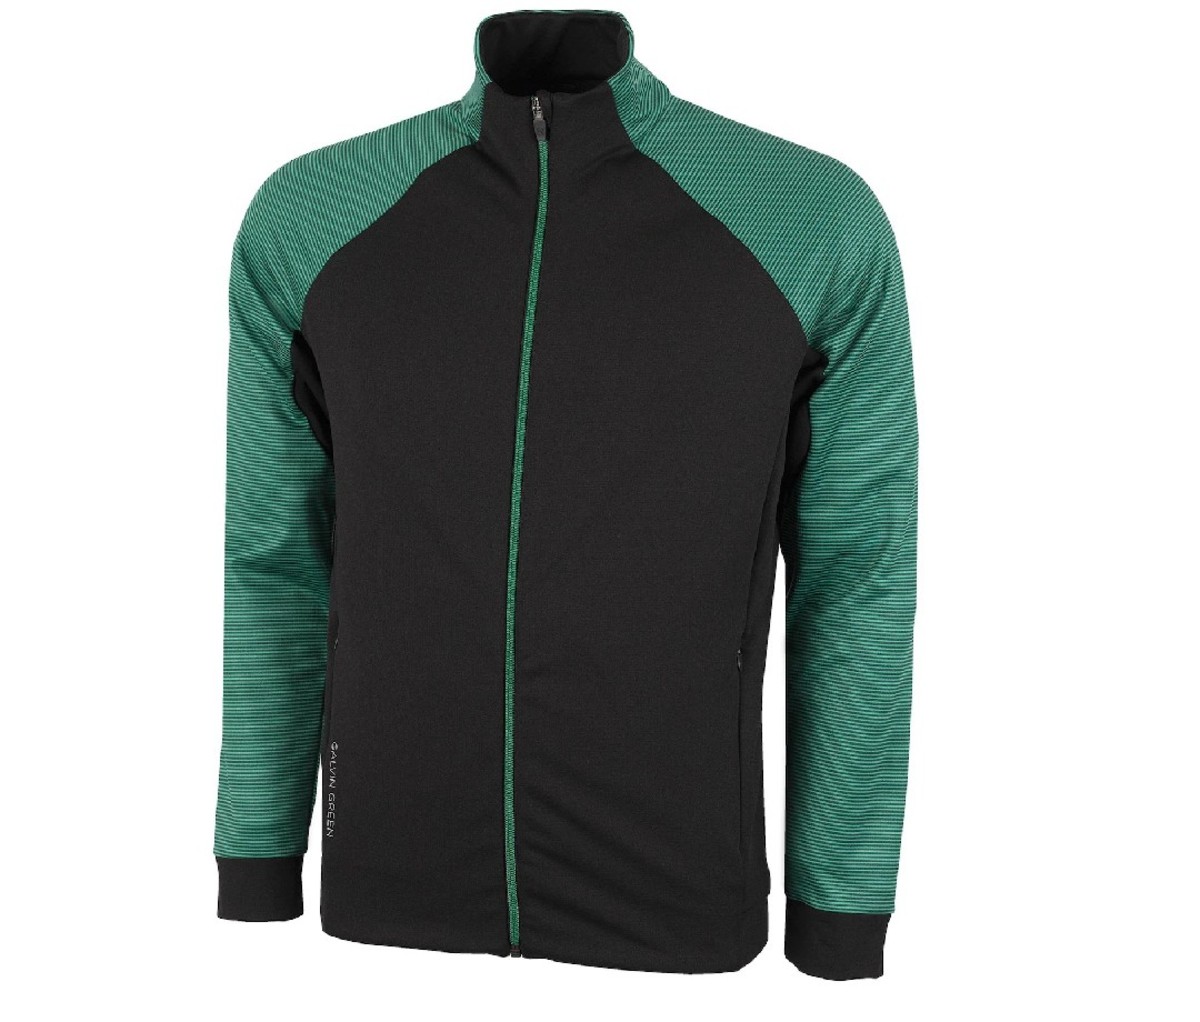 Green-sleeved Galvin Green Dominic jacket with black base